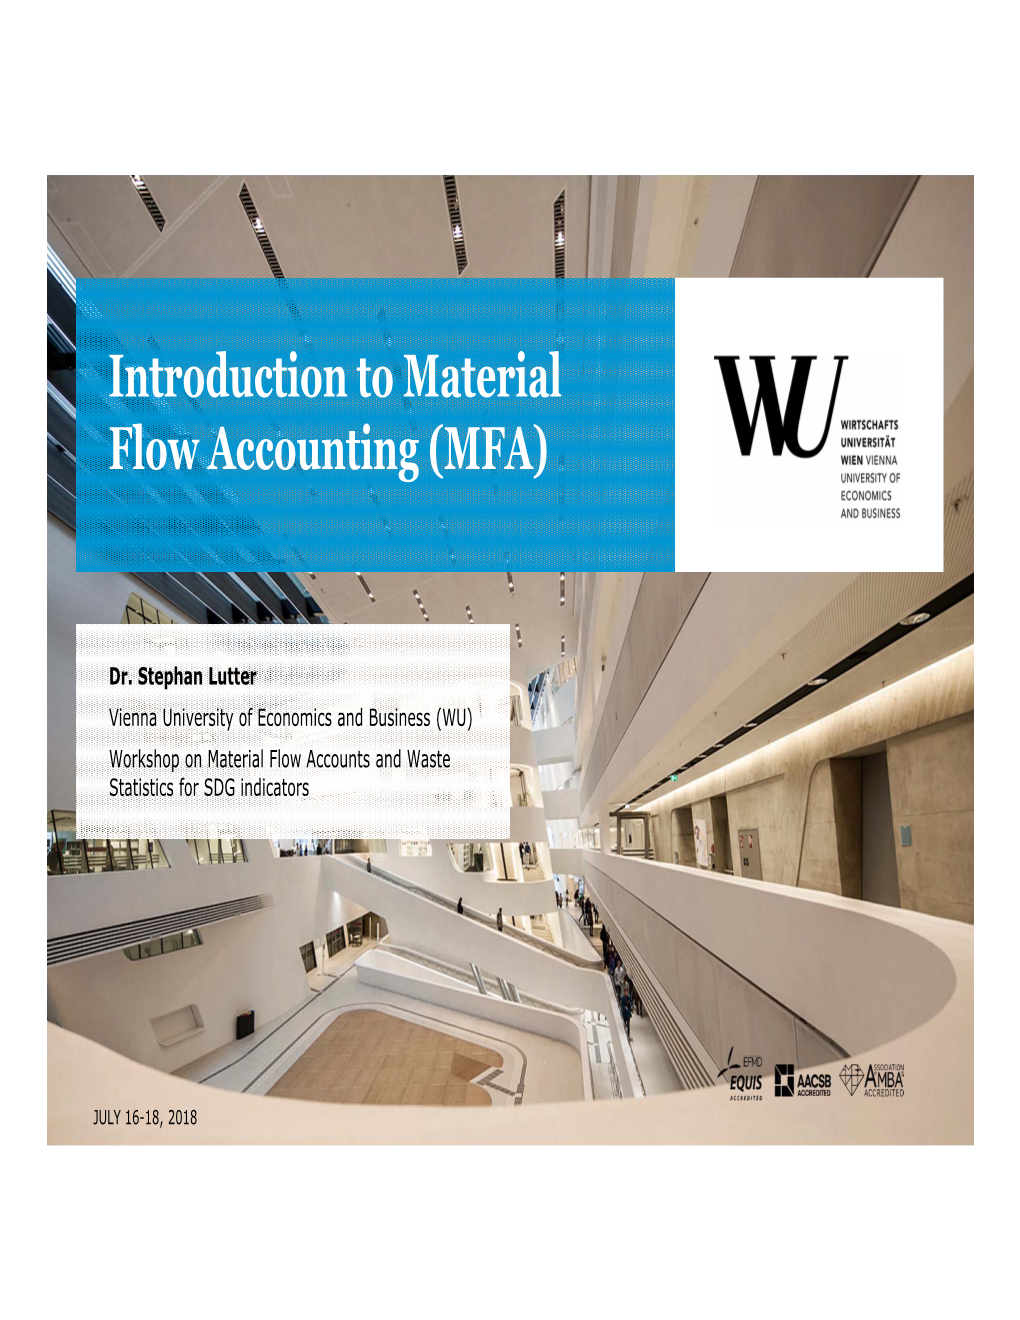 Introduction to Material Flow Accounting (MFA)